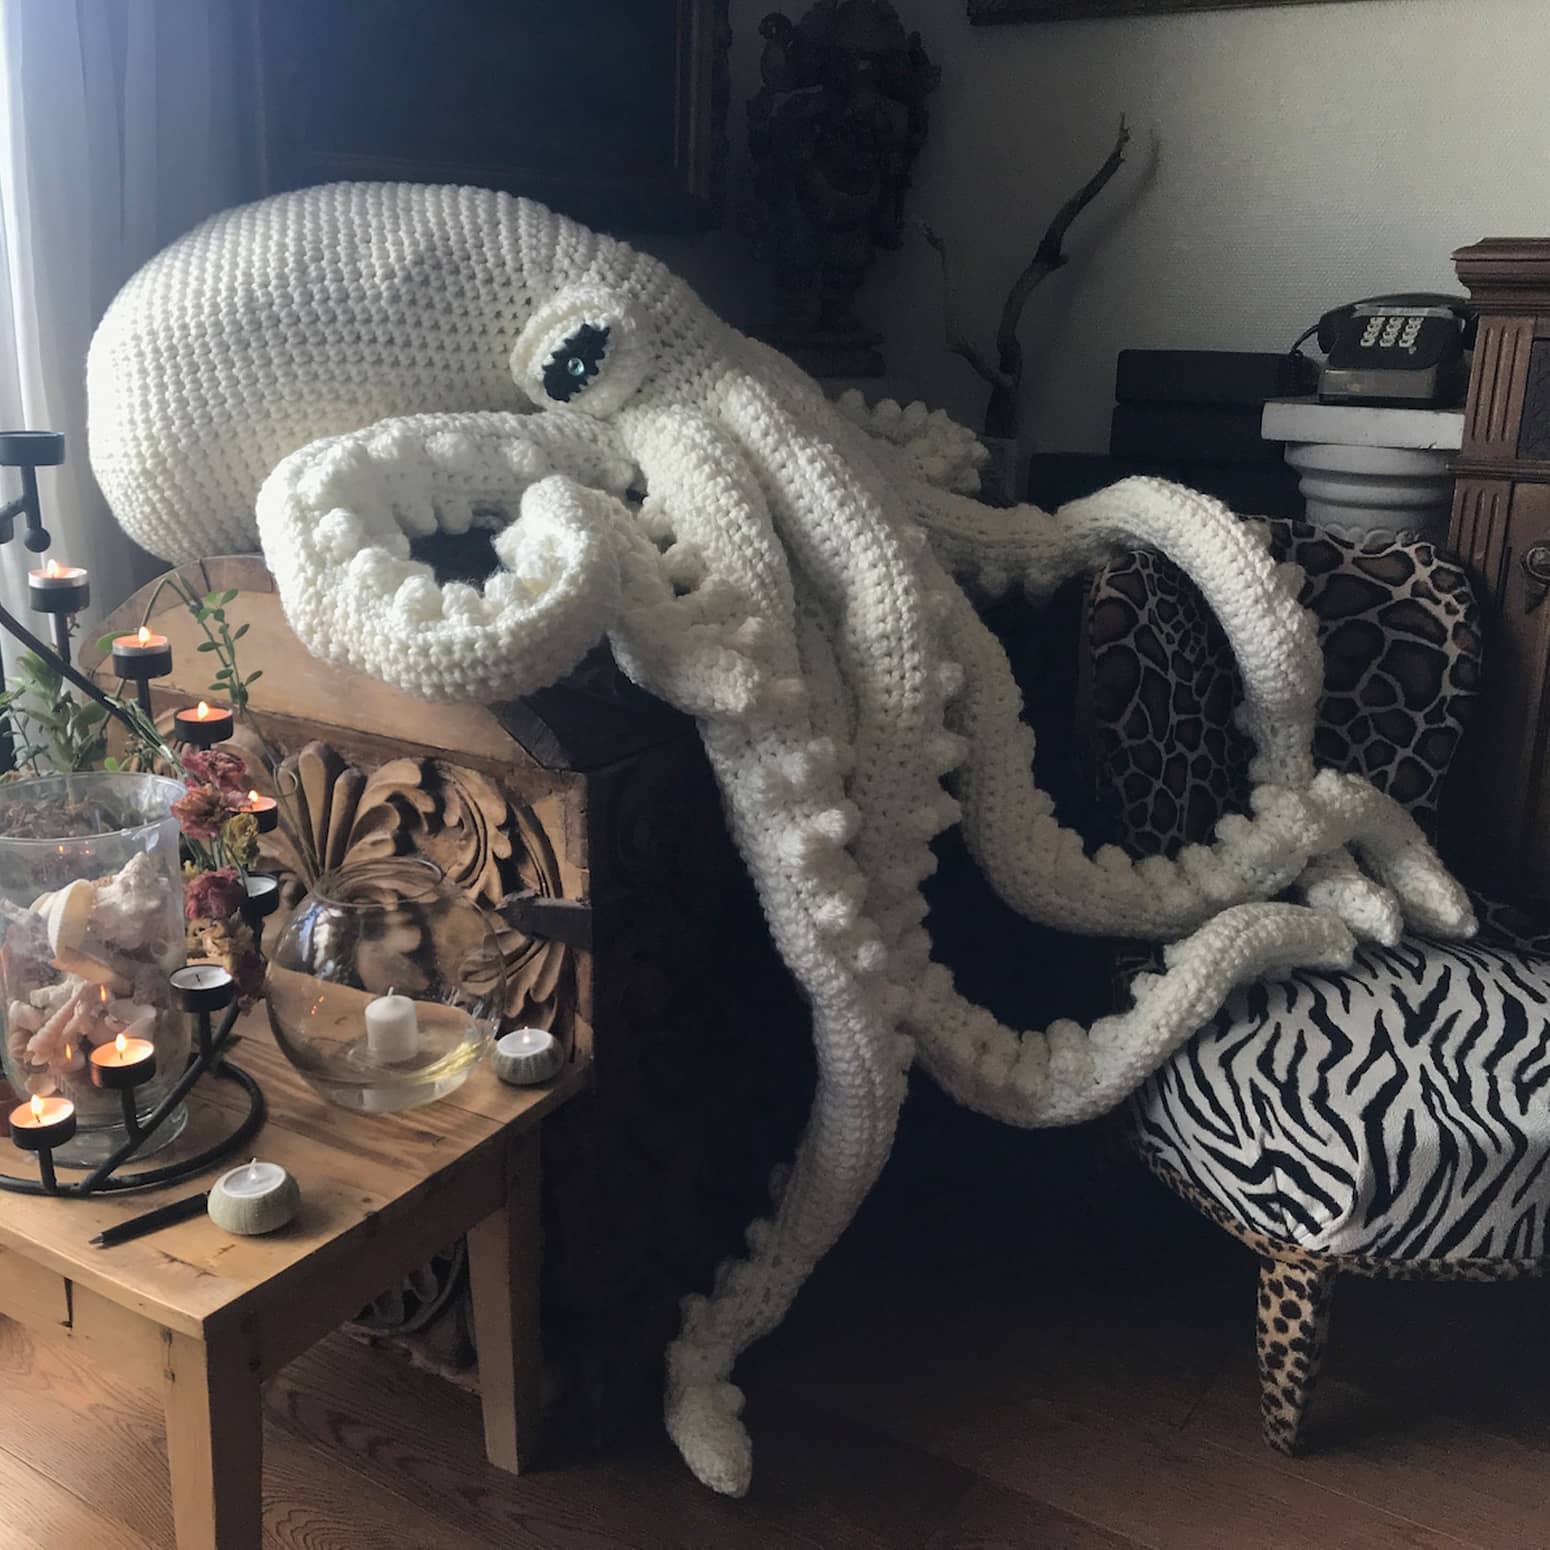 Alfred the Giant Crocheted Octopus